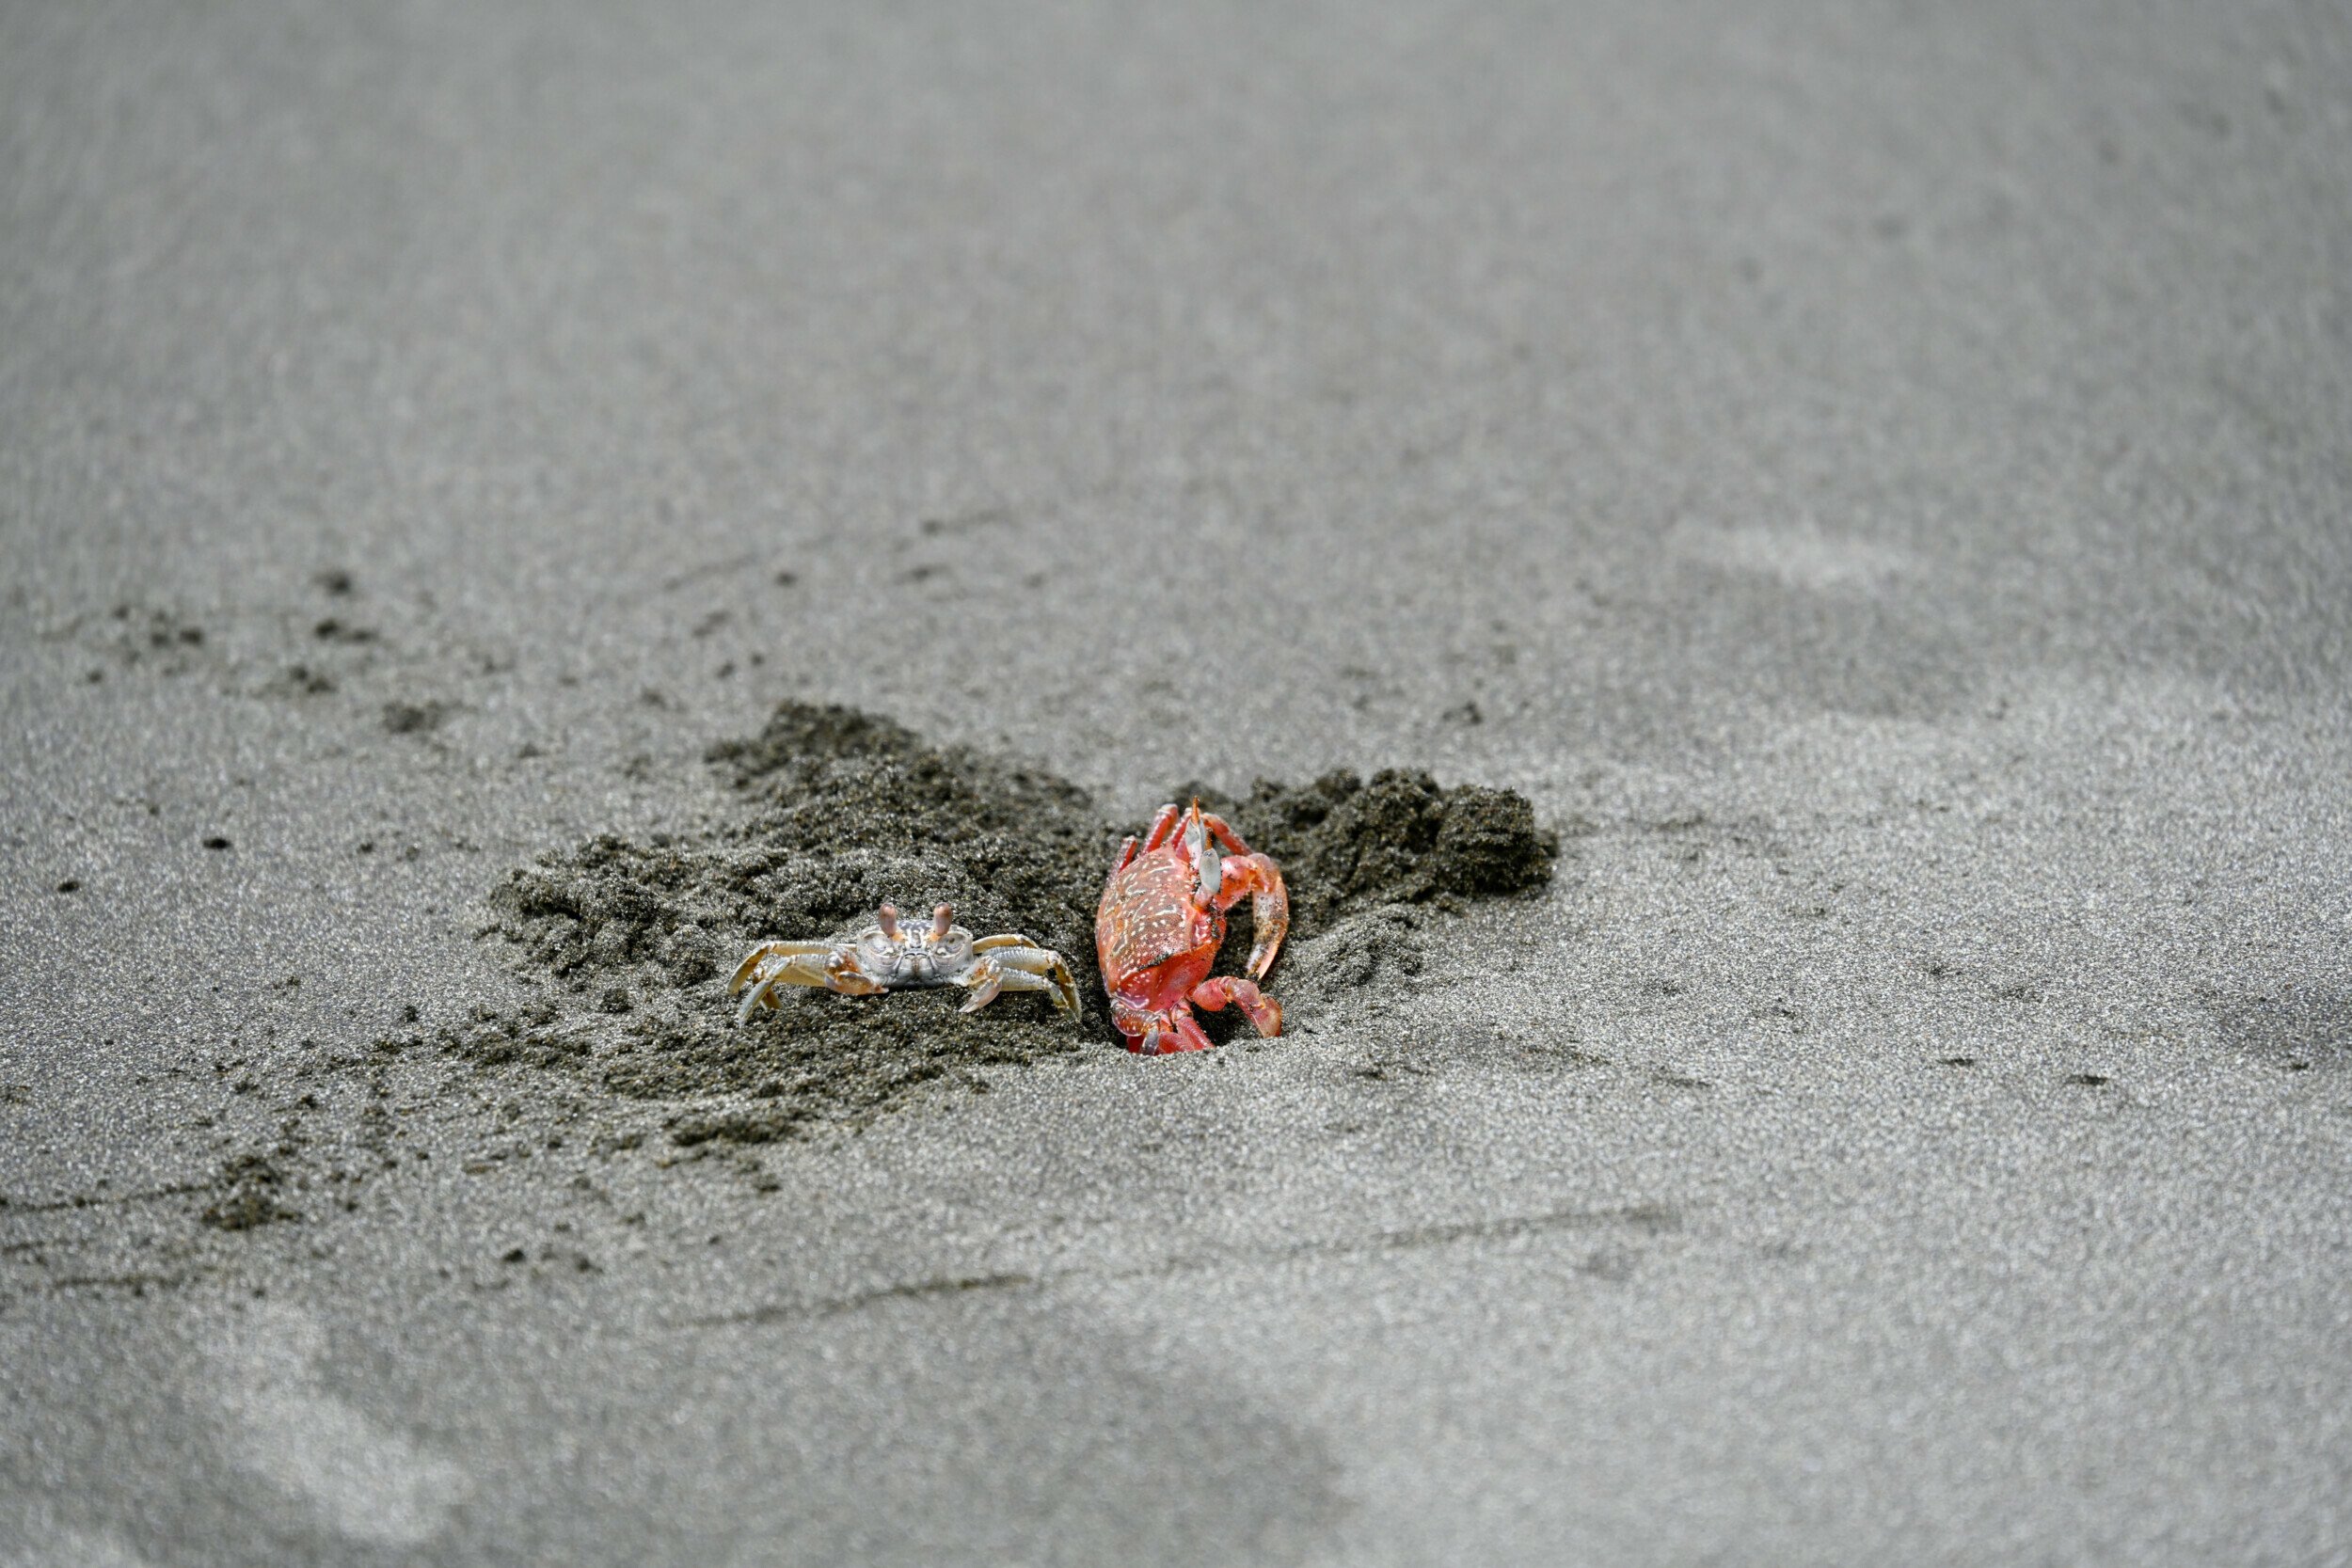 Two crabs on the sandy shore of Palo Seco Beach, Costa Rica, with one emerging from a burrow.